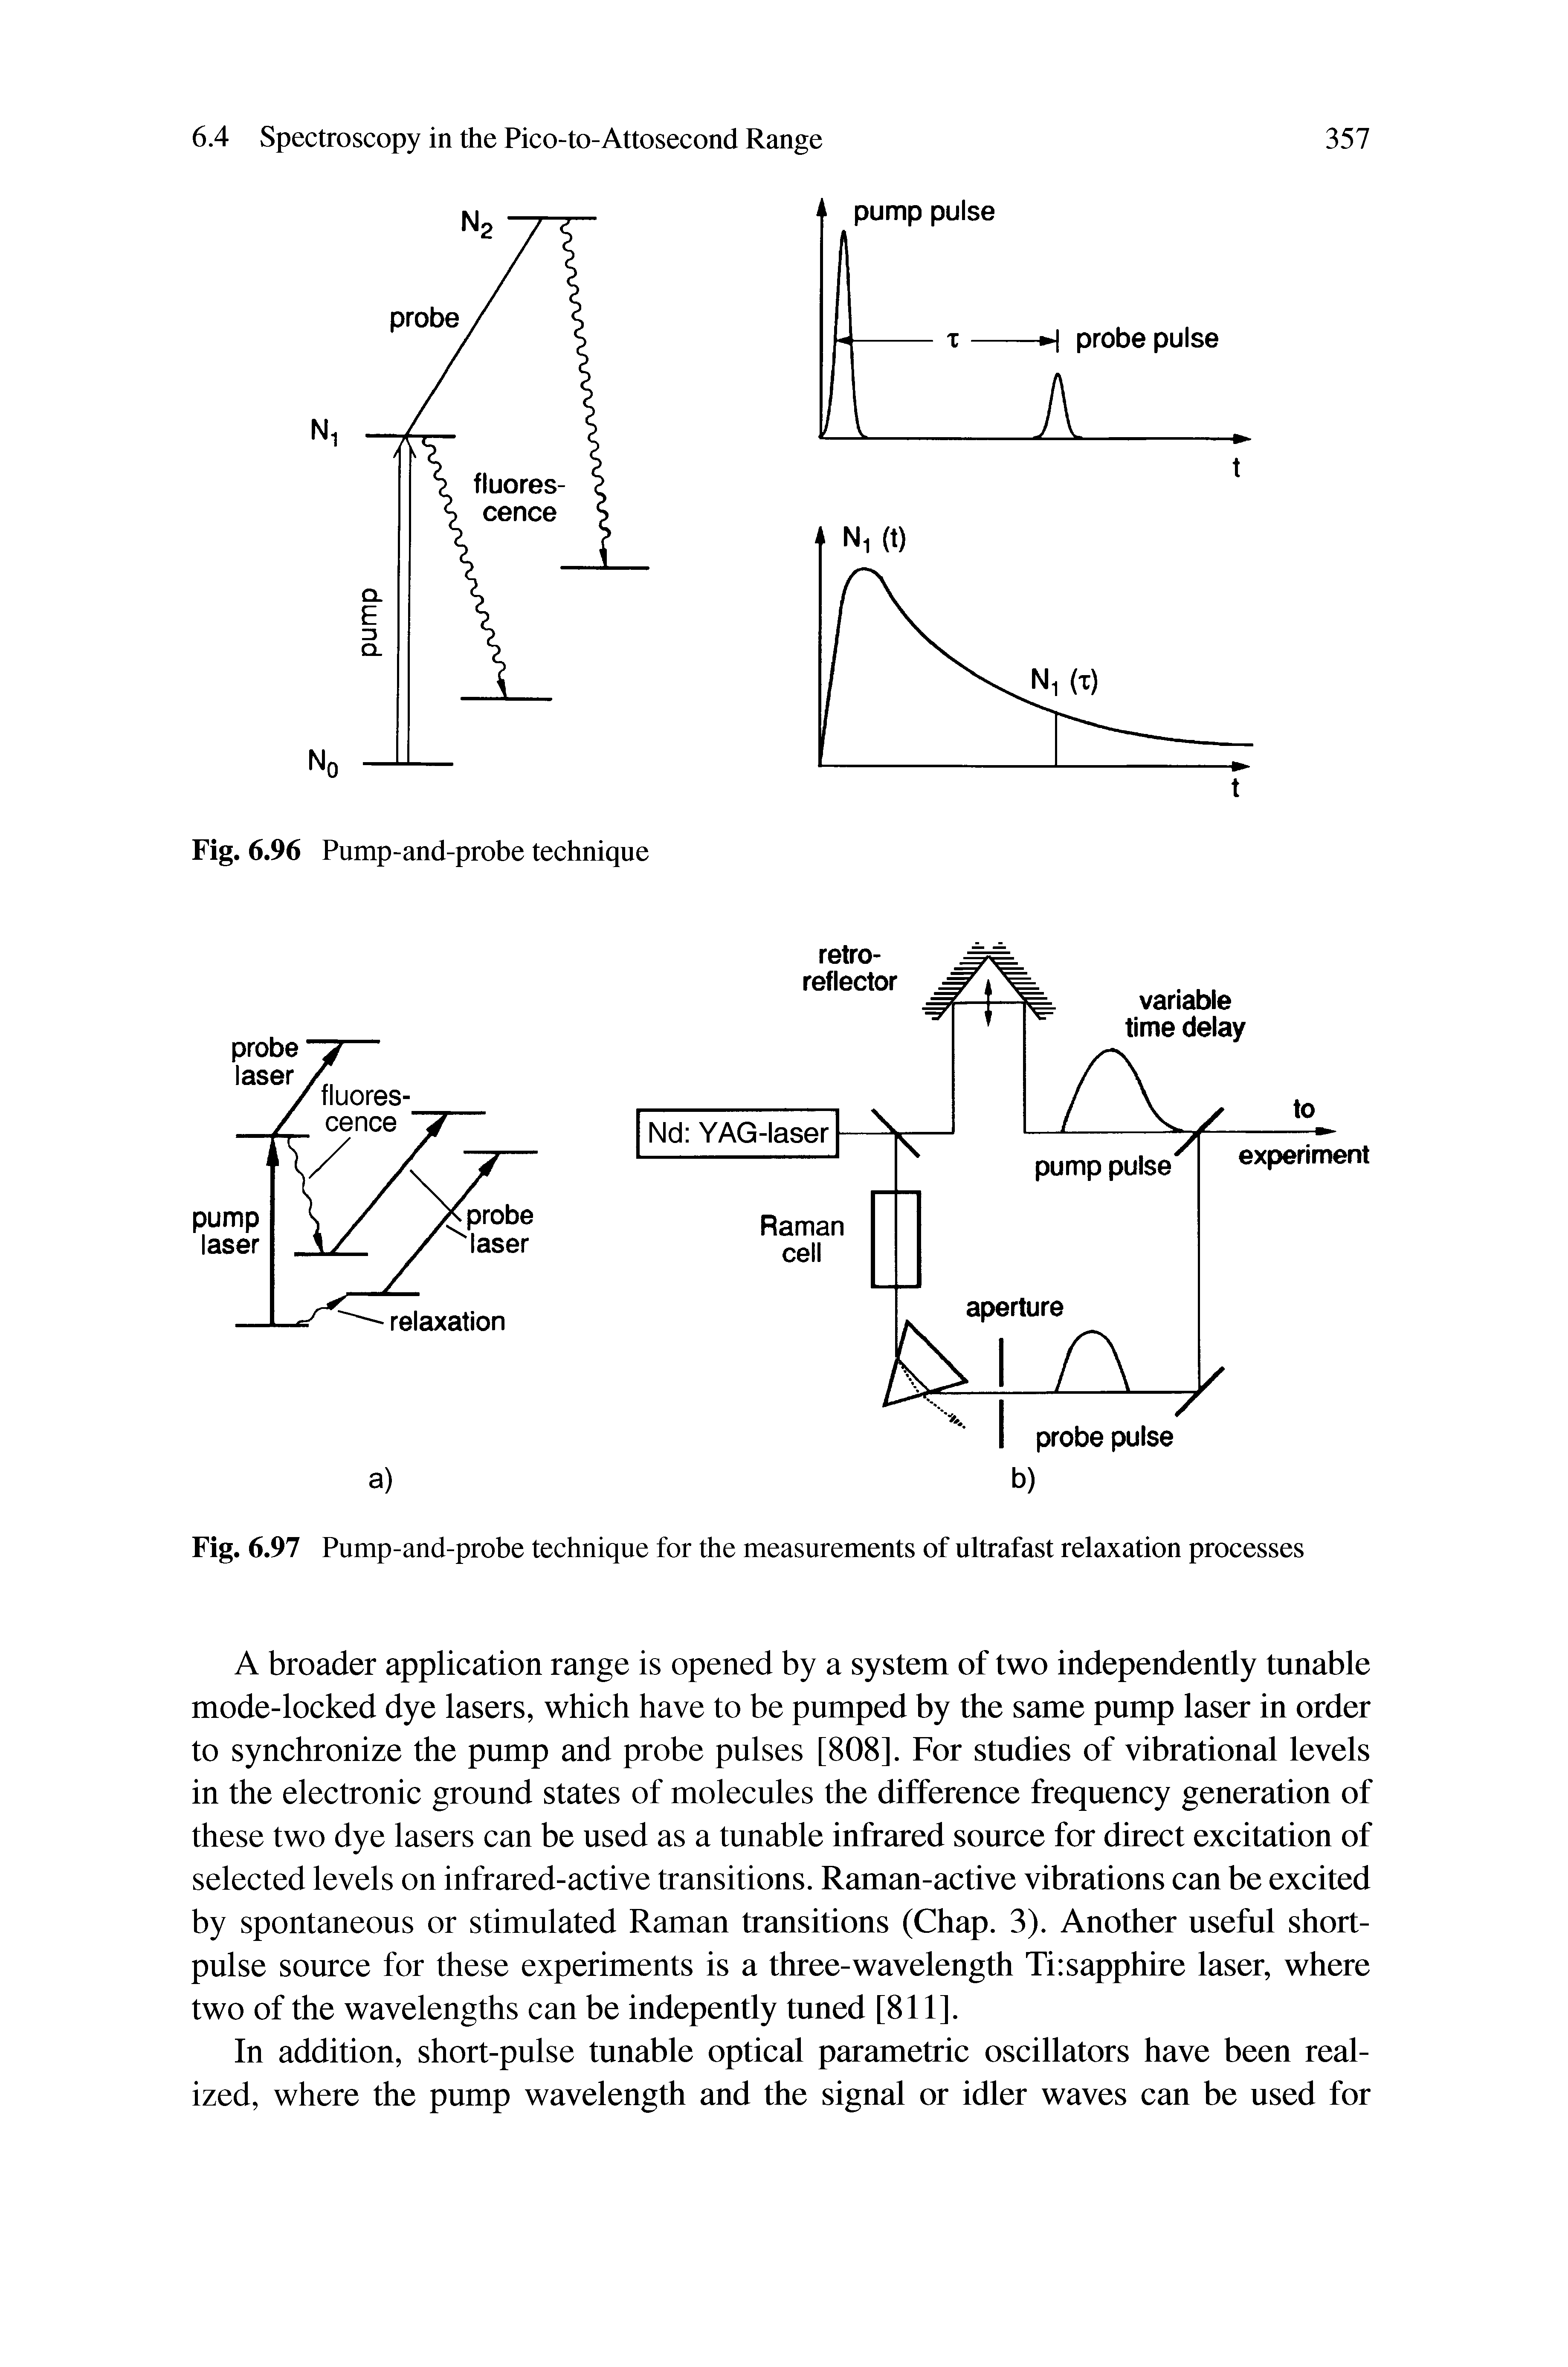 Fig. 6.97 Pump-and-probe technique for the measurements of ultrafast relaxation processes...